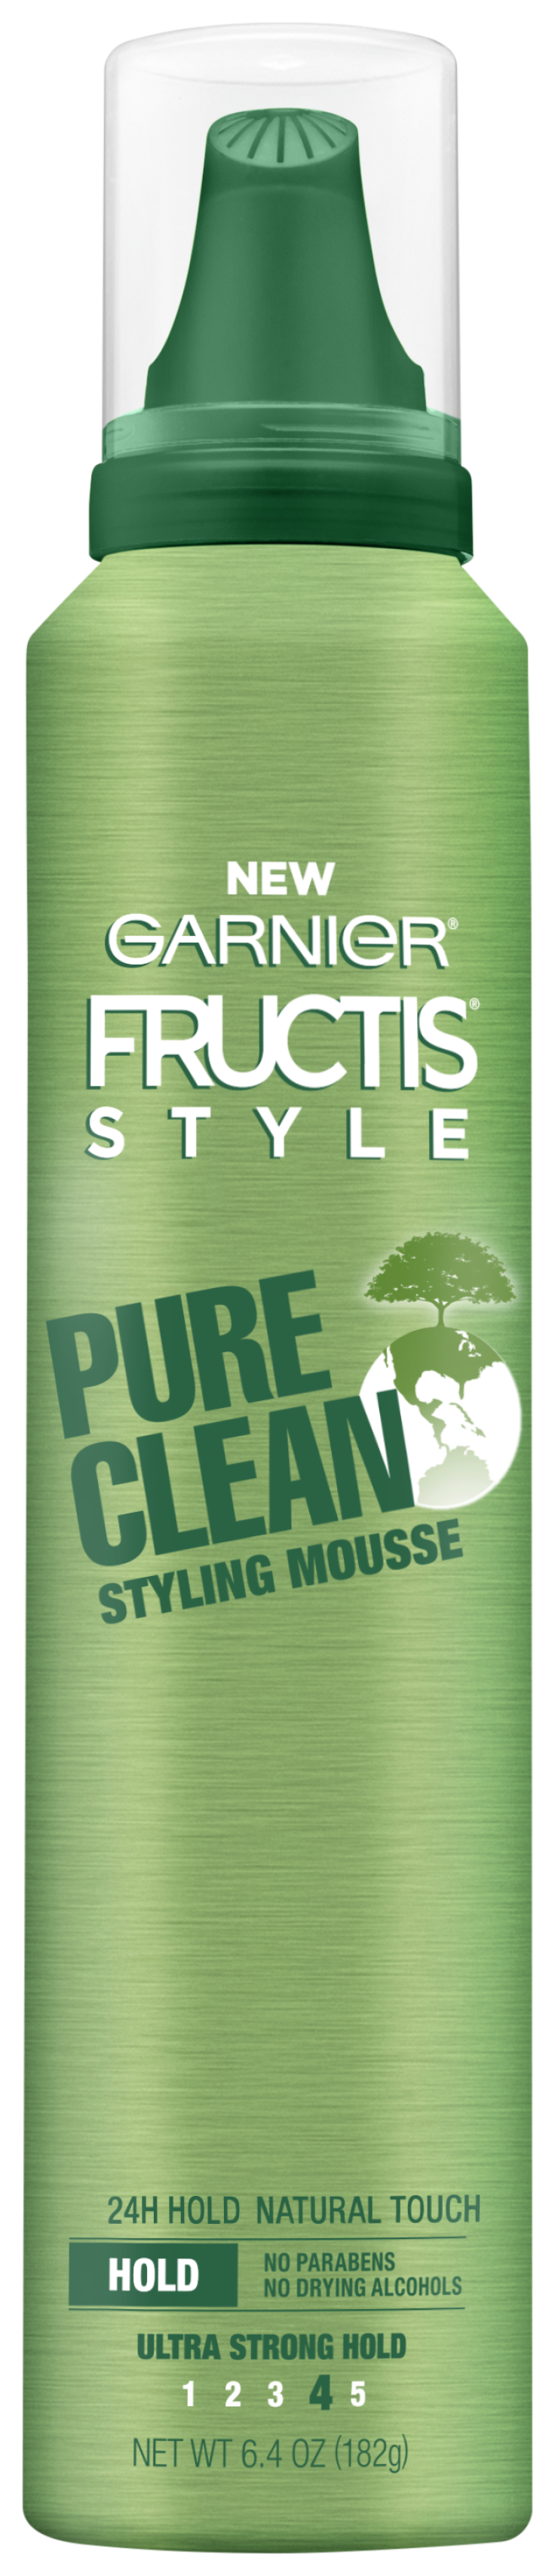 Garnier Fructis Style Pure Clean Styling Mousse (FRONT)